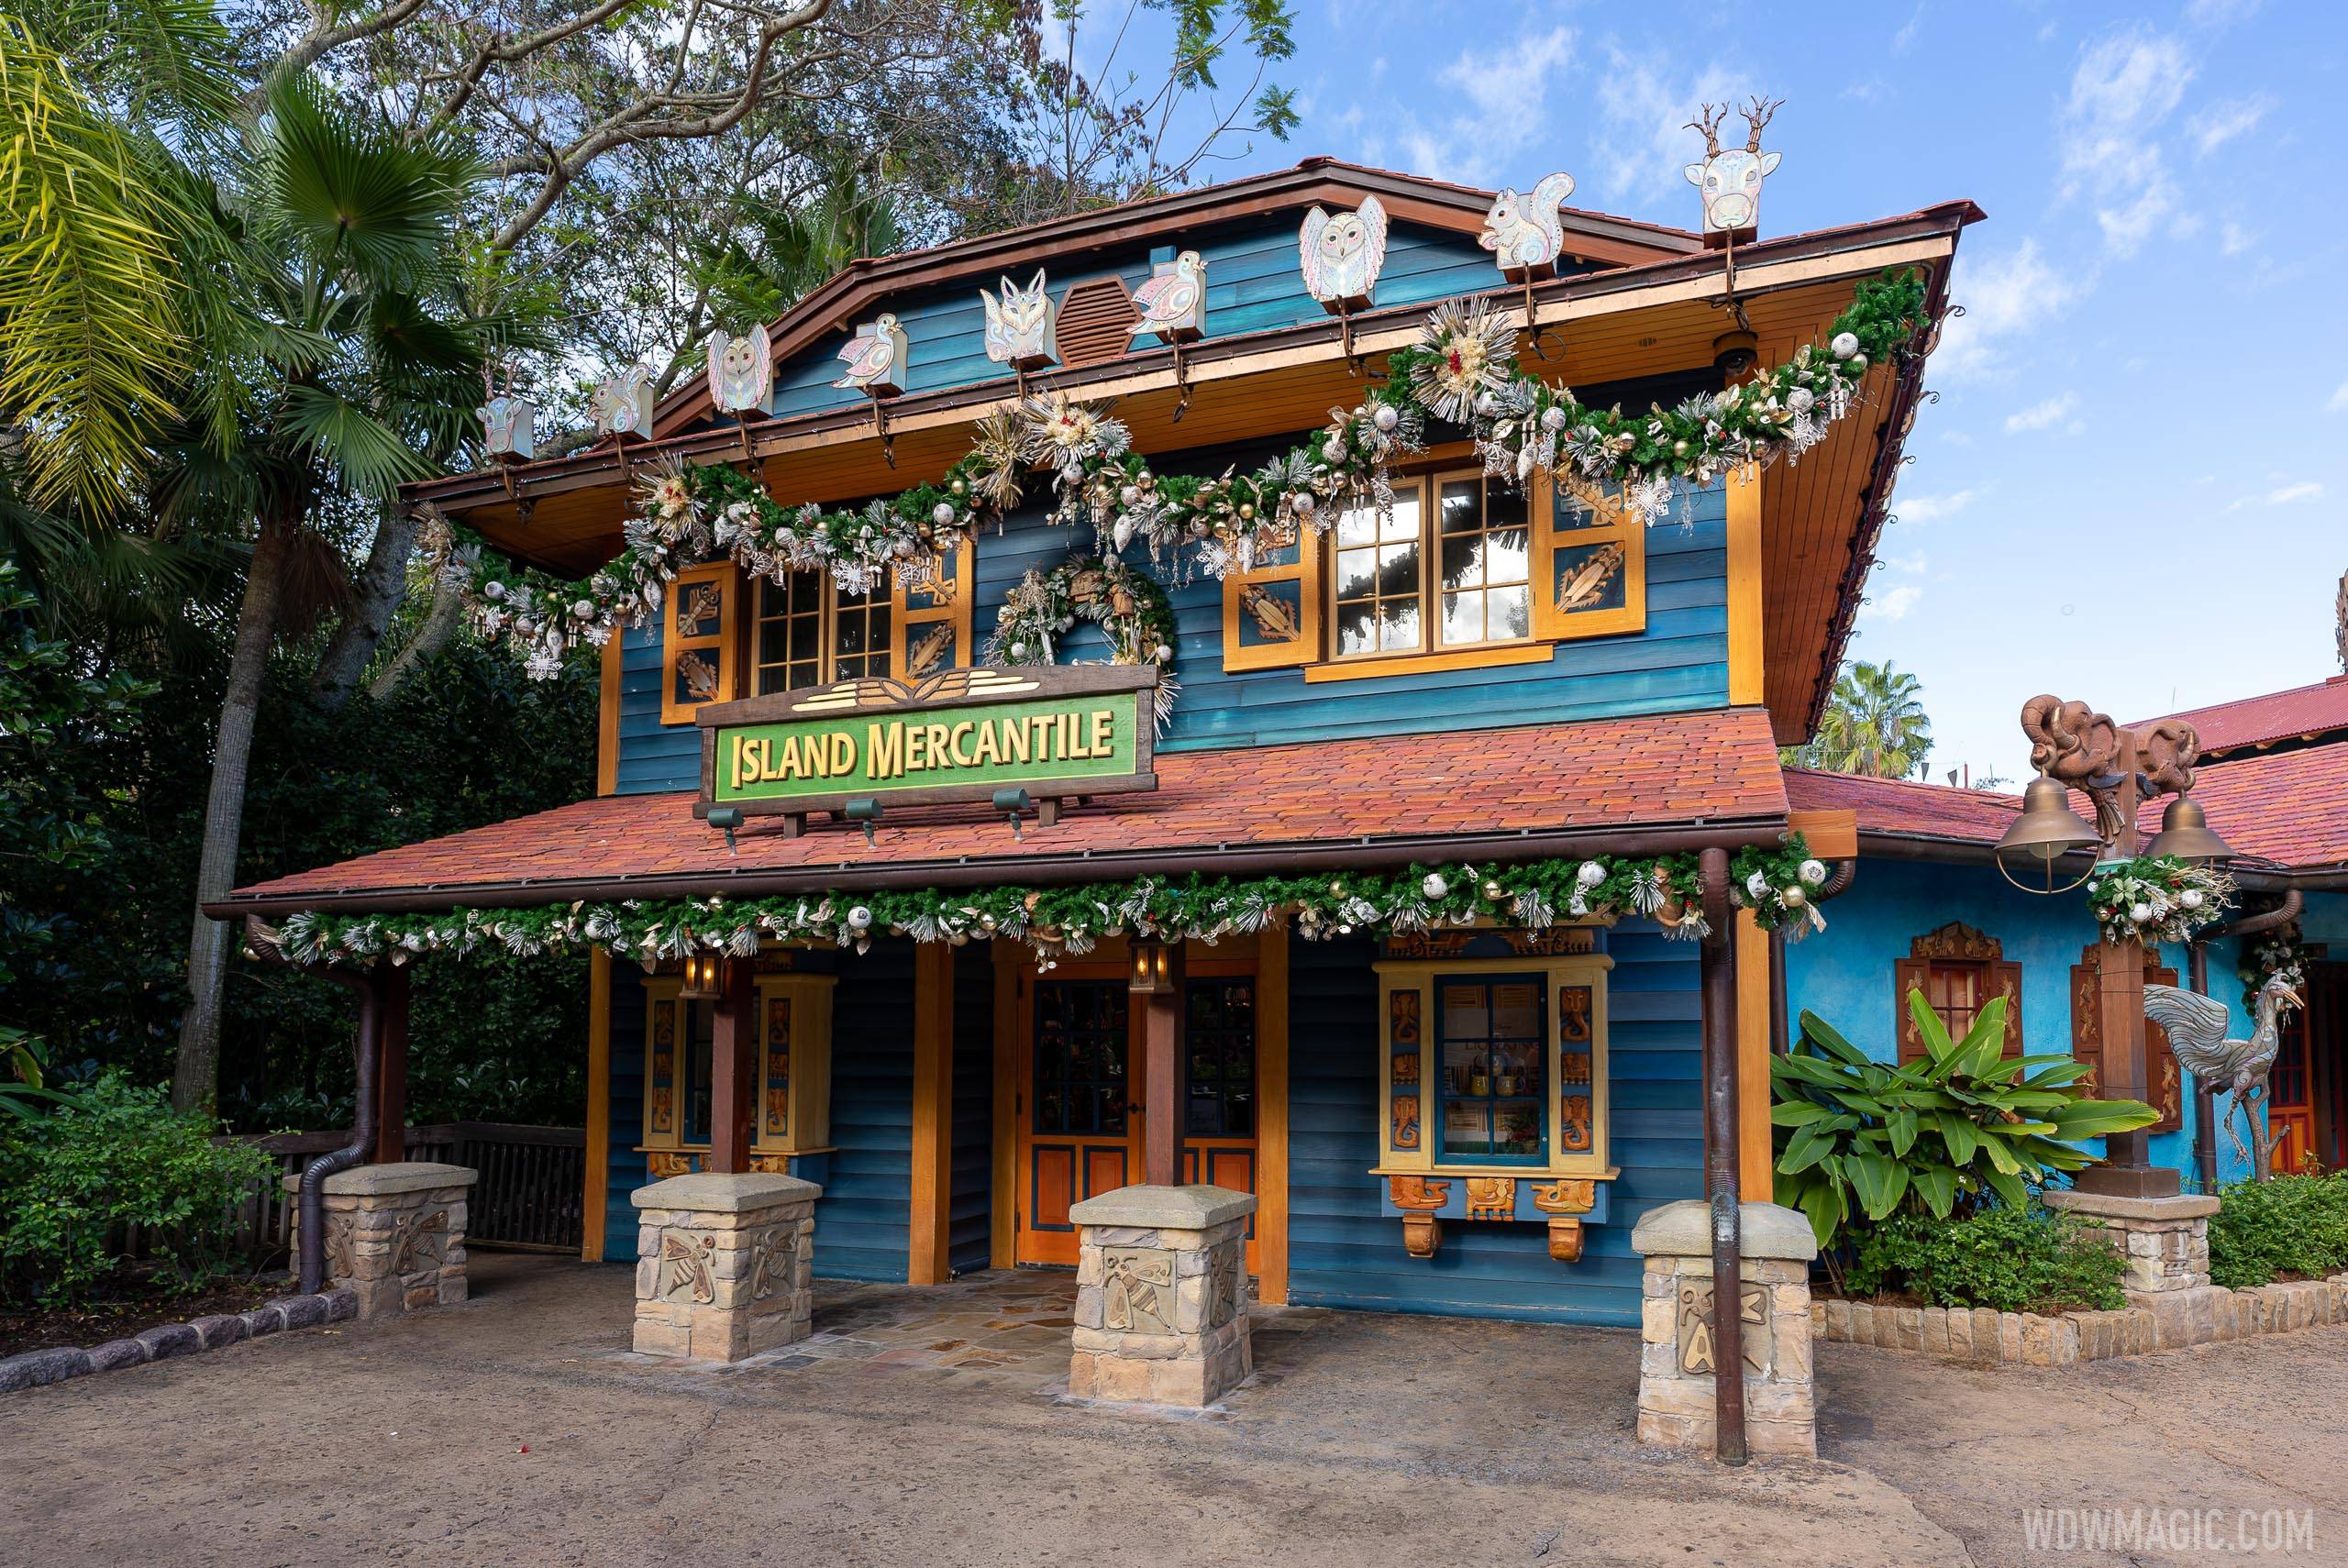 Mobile Checkout via My Disney Experience launches today at Island Mercantile